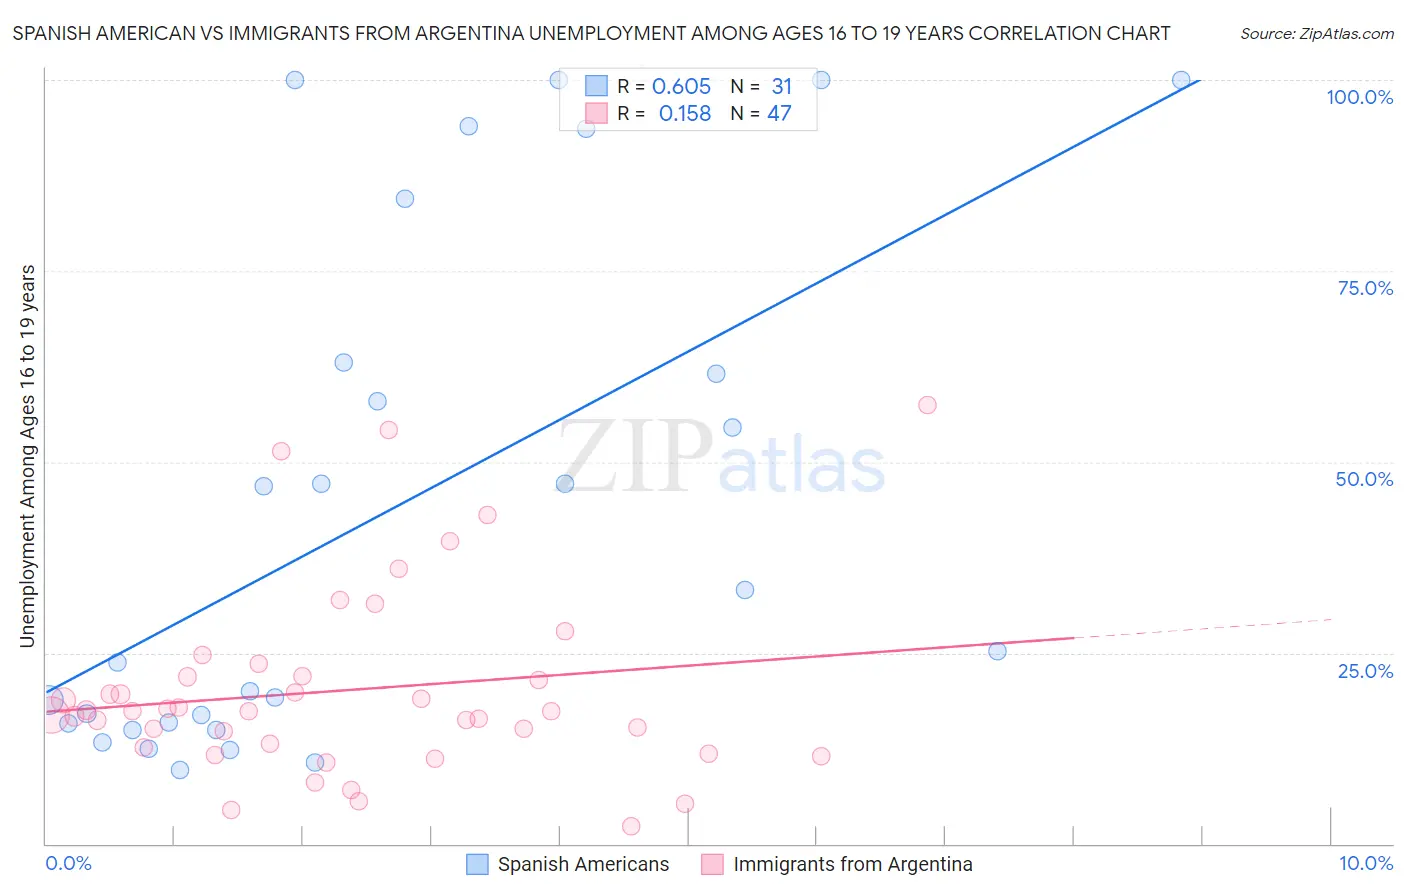 Spanish American vs Immigrants from Argentina Unemployment Among Ages 16 to 19 years